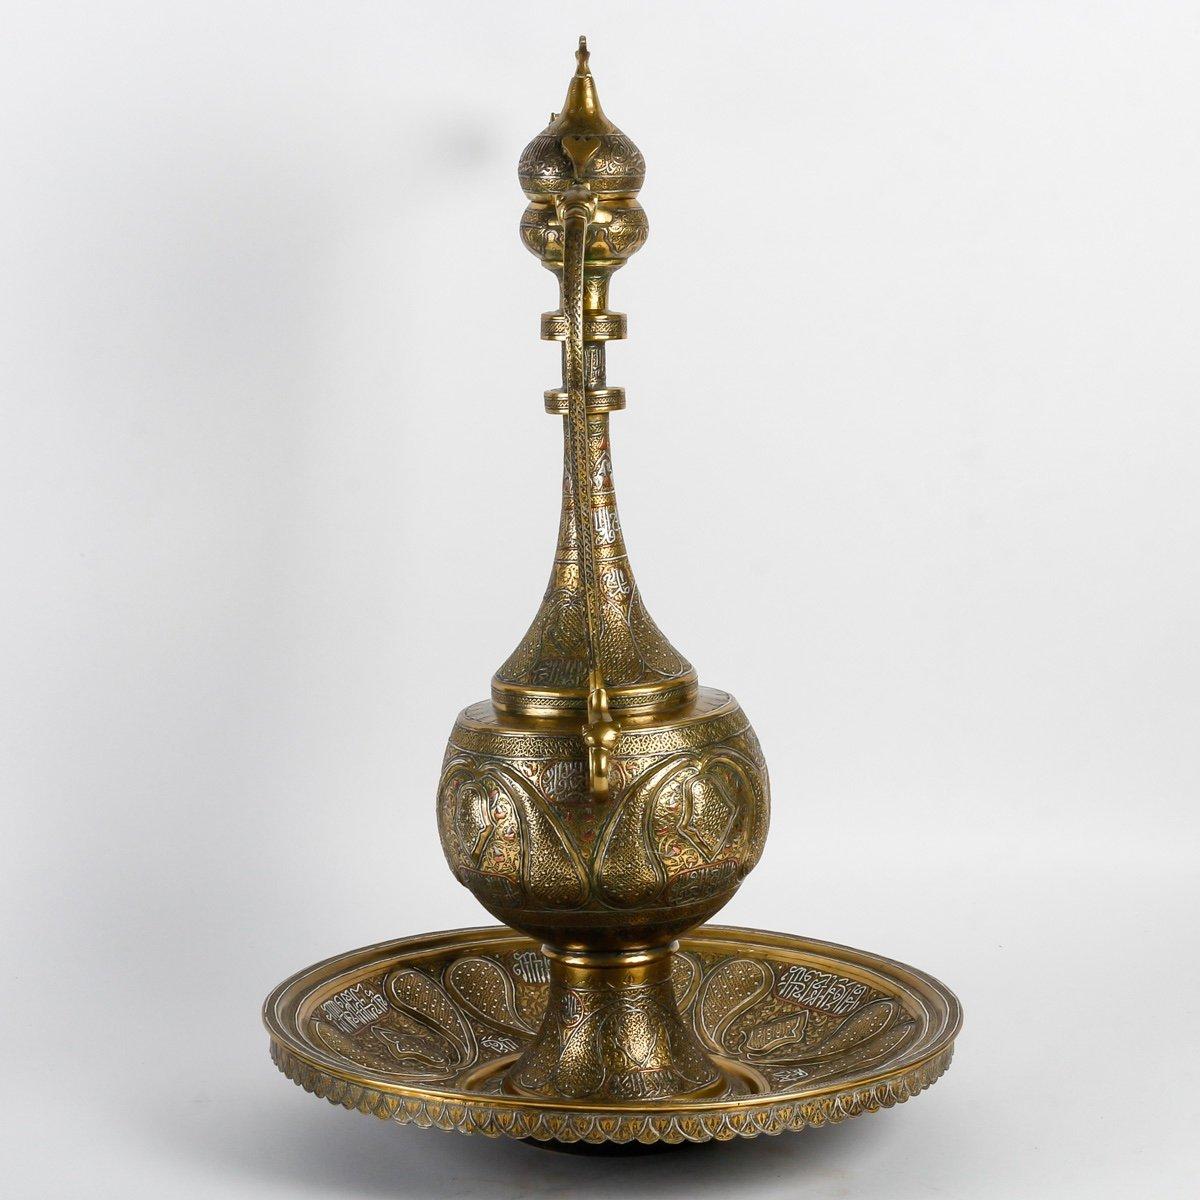 Islamic Aiguère in Brass and Silver from the XIXth Century, Syria.